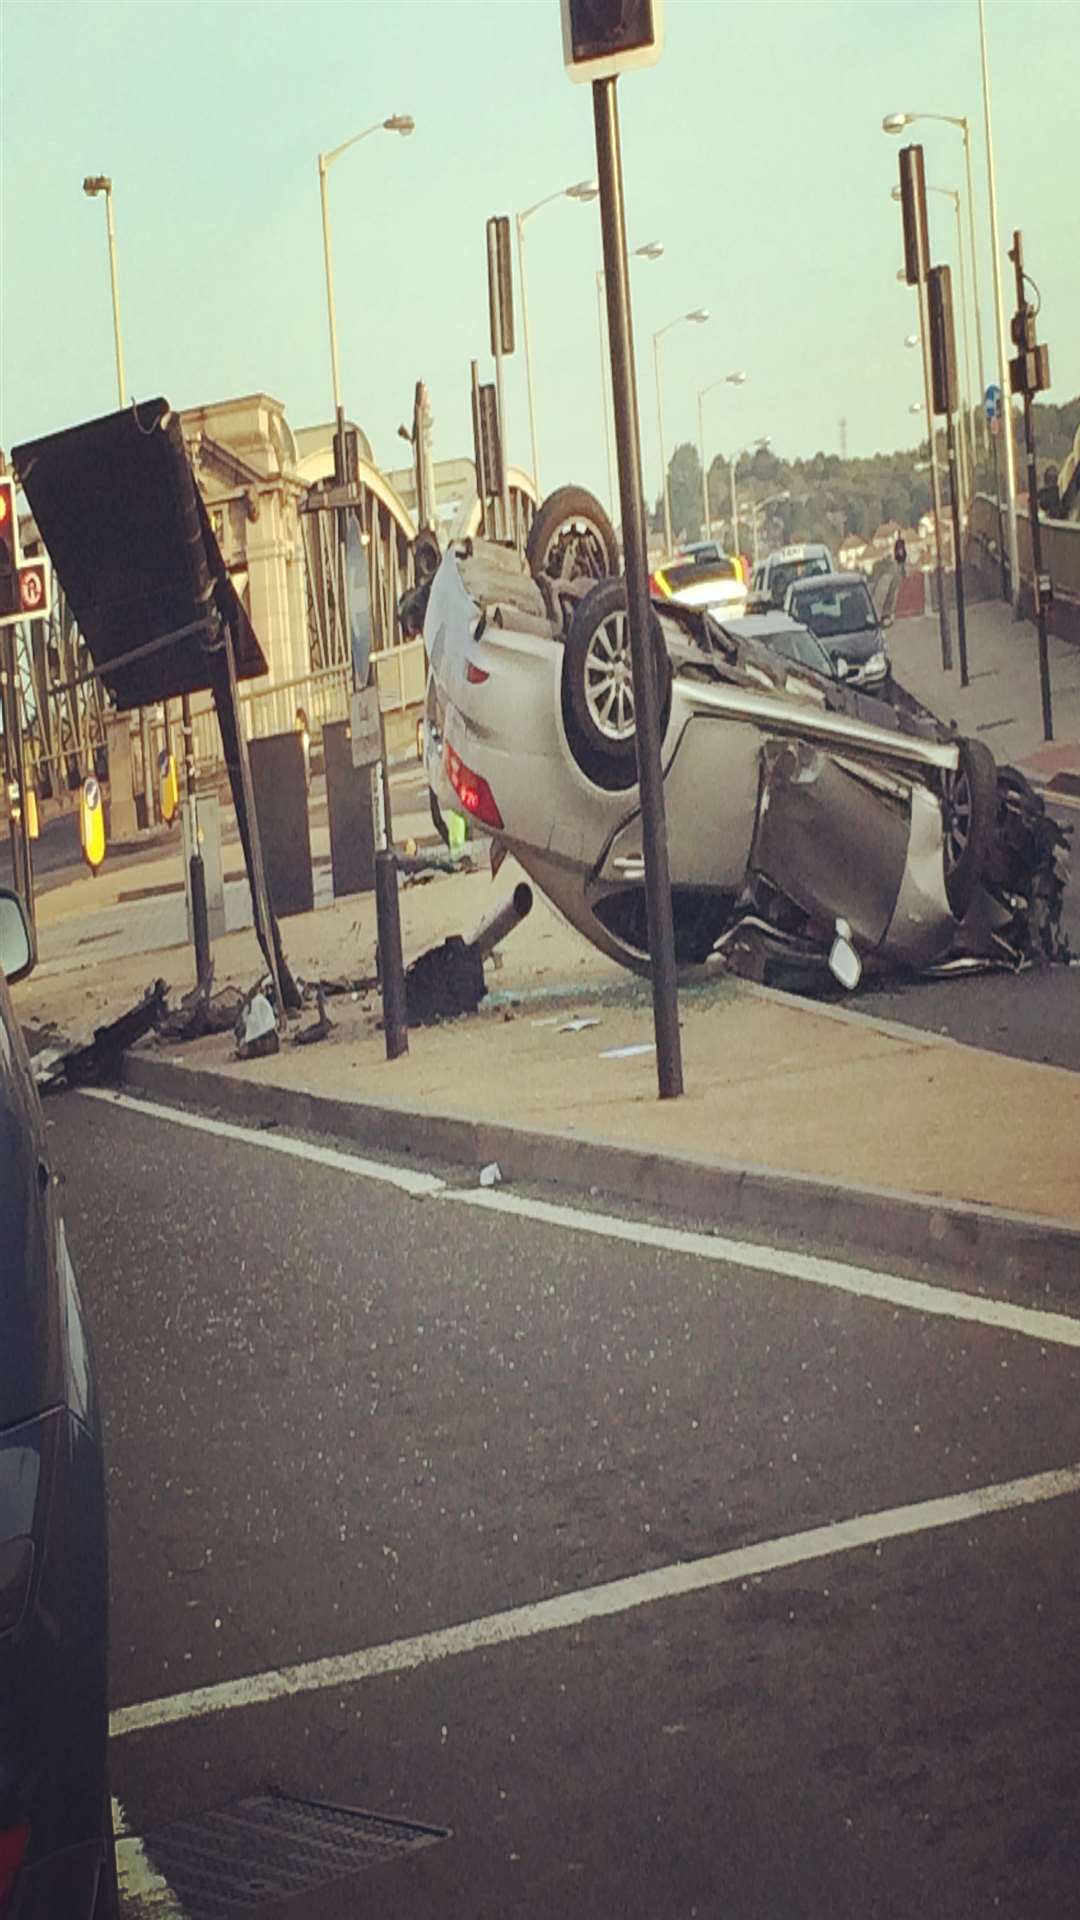 A car overturned after losing control near Rochester Bridge